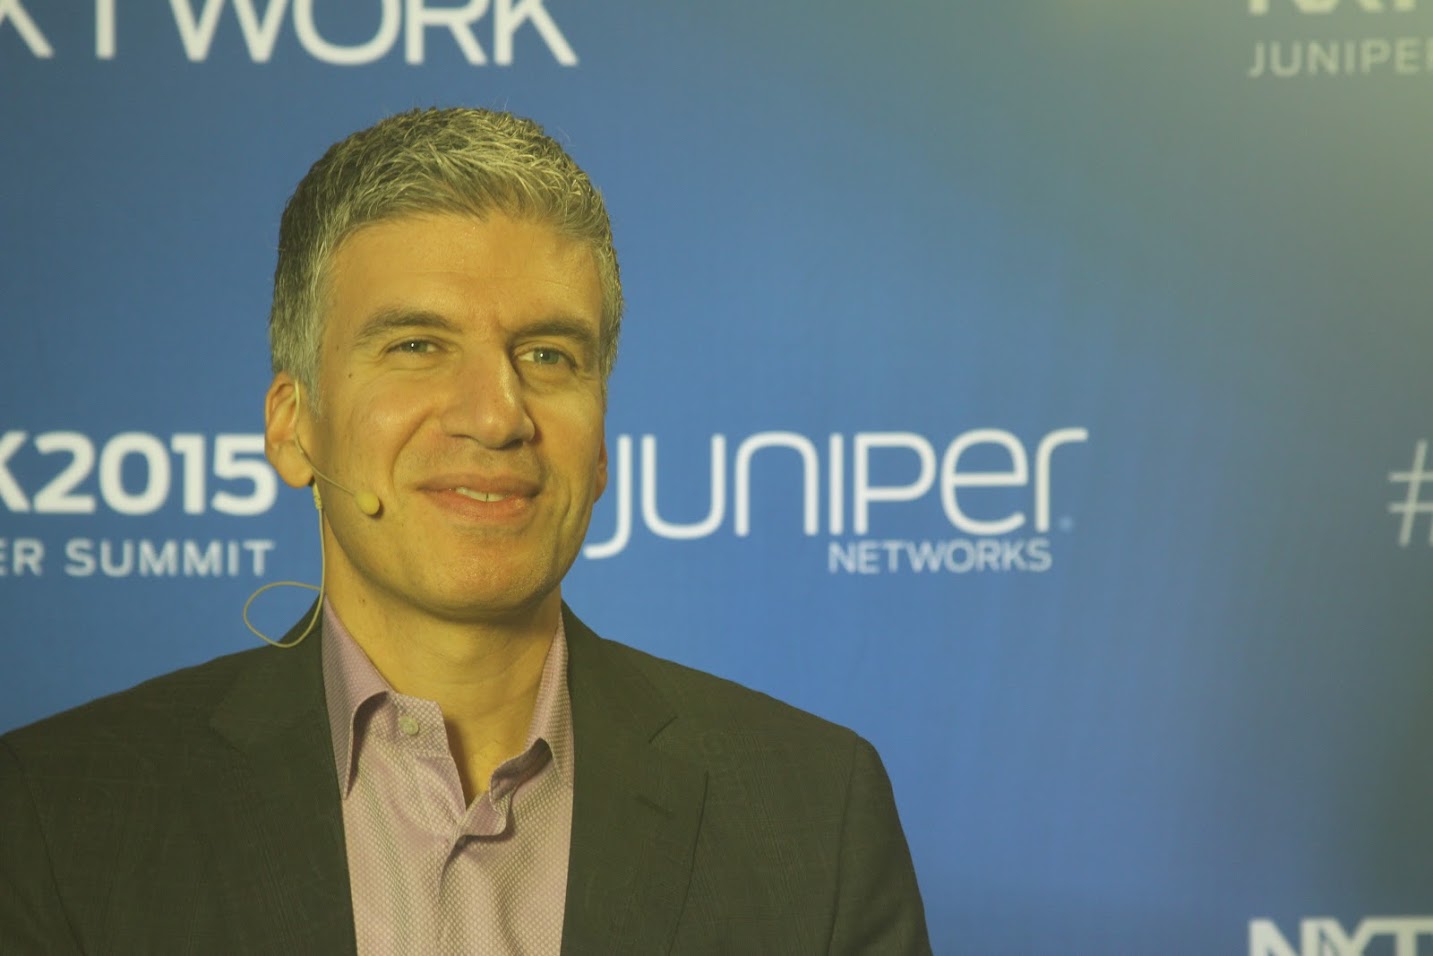 Juniper Network's stock falls as it warns of elevated supply costs